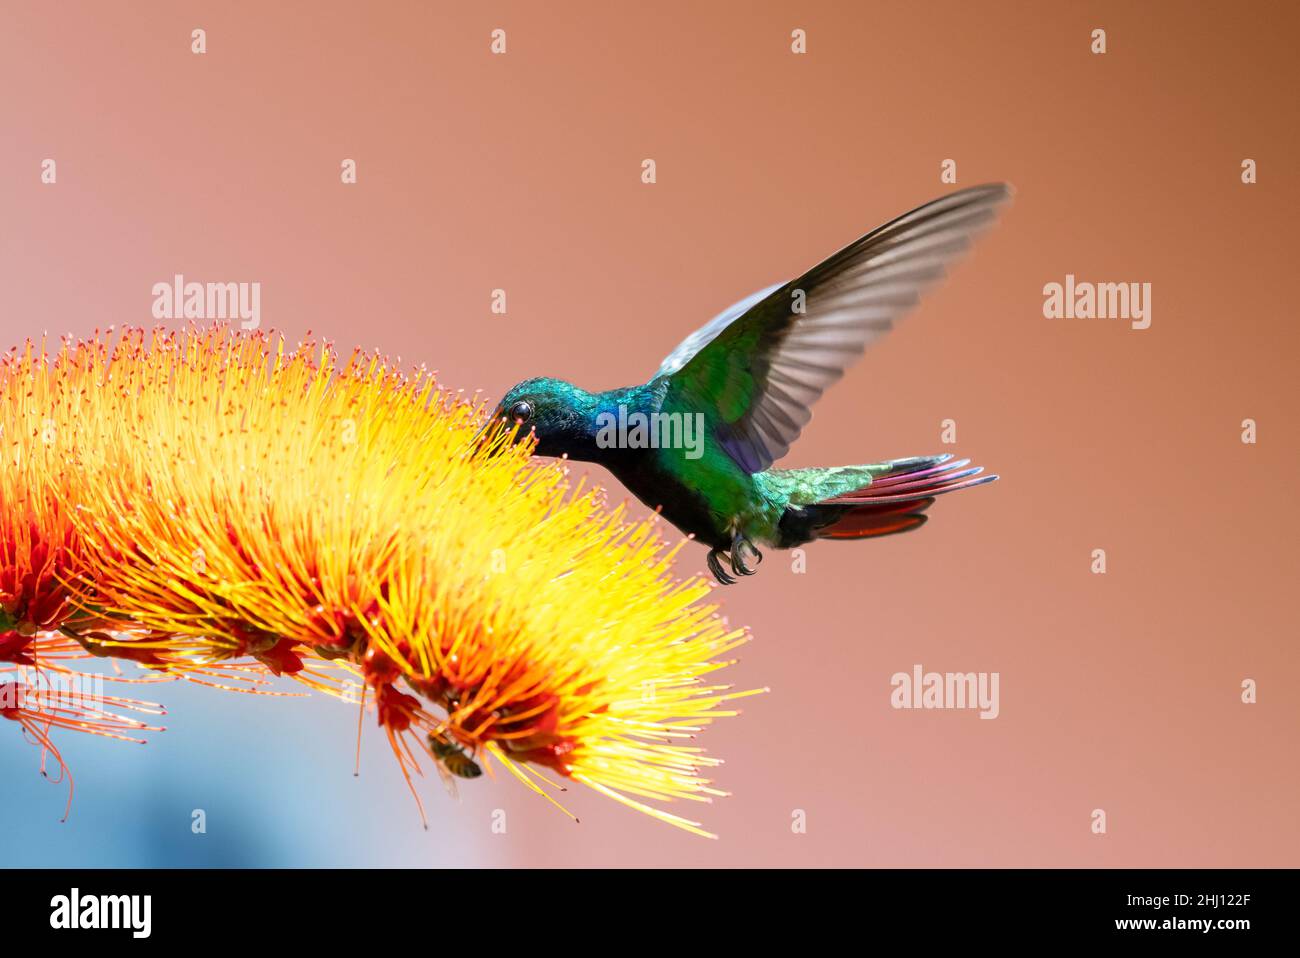 Glittering Black-throated Mango hummingbird, Anthracothorax nigricollis, feeding on a tropical Combretum flower, isolated on an orange background. Stock Photo